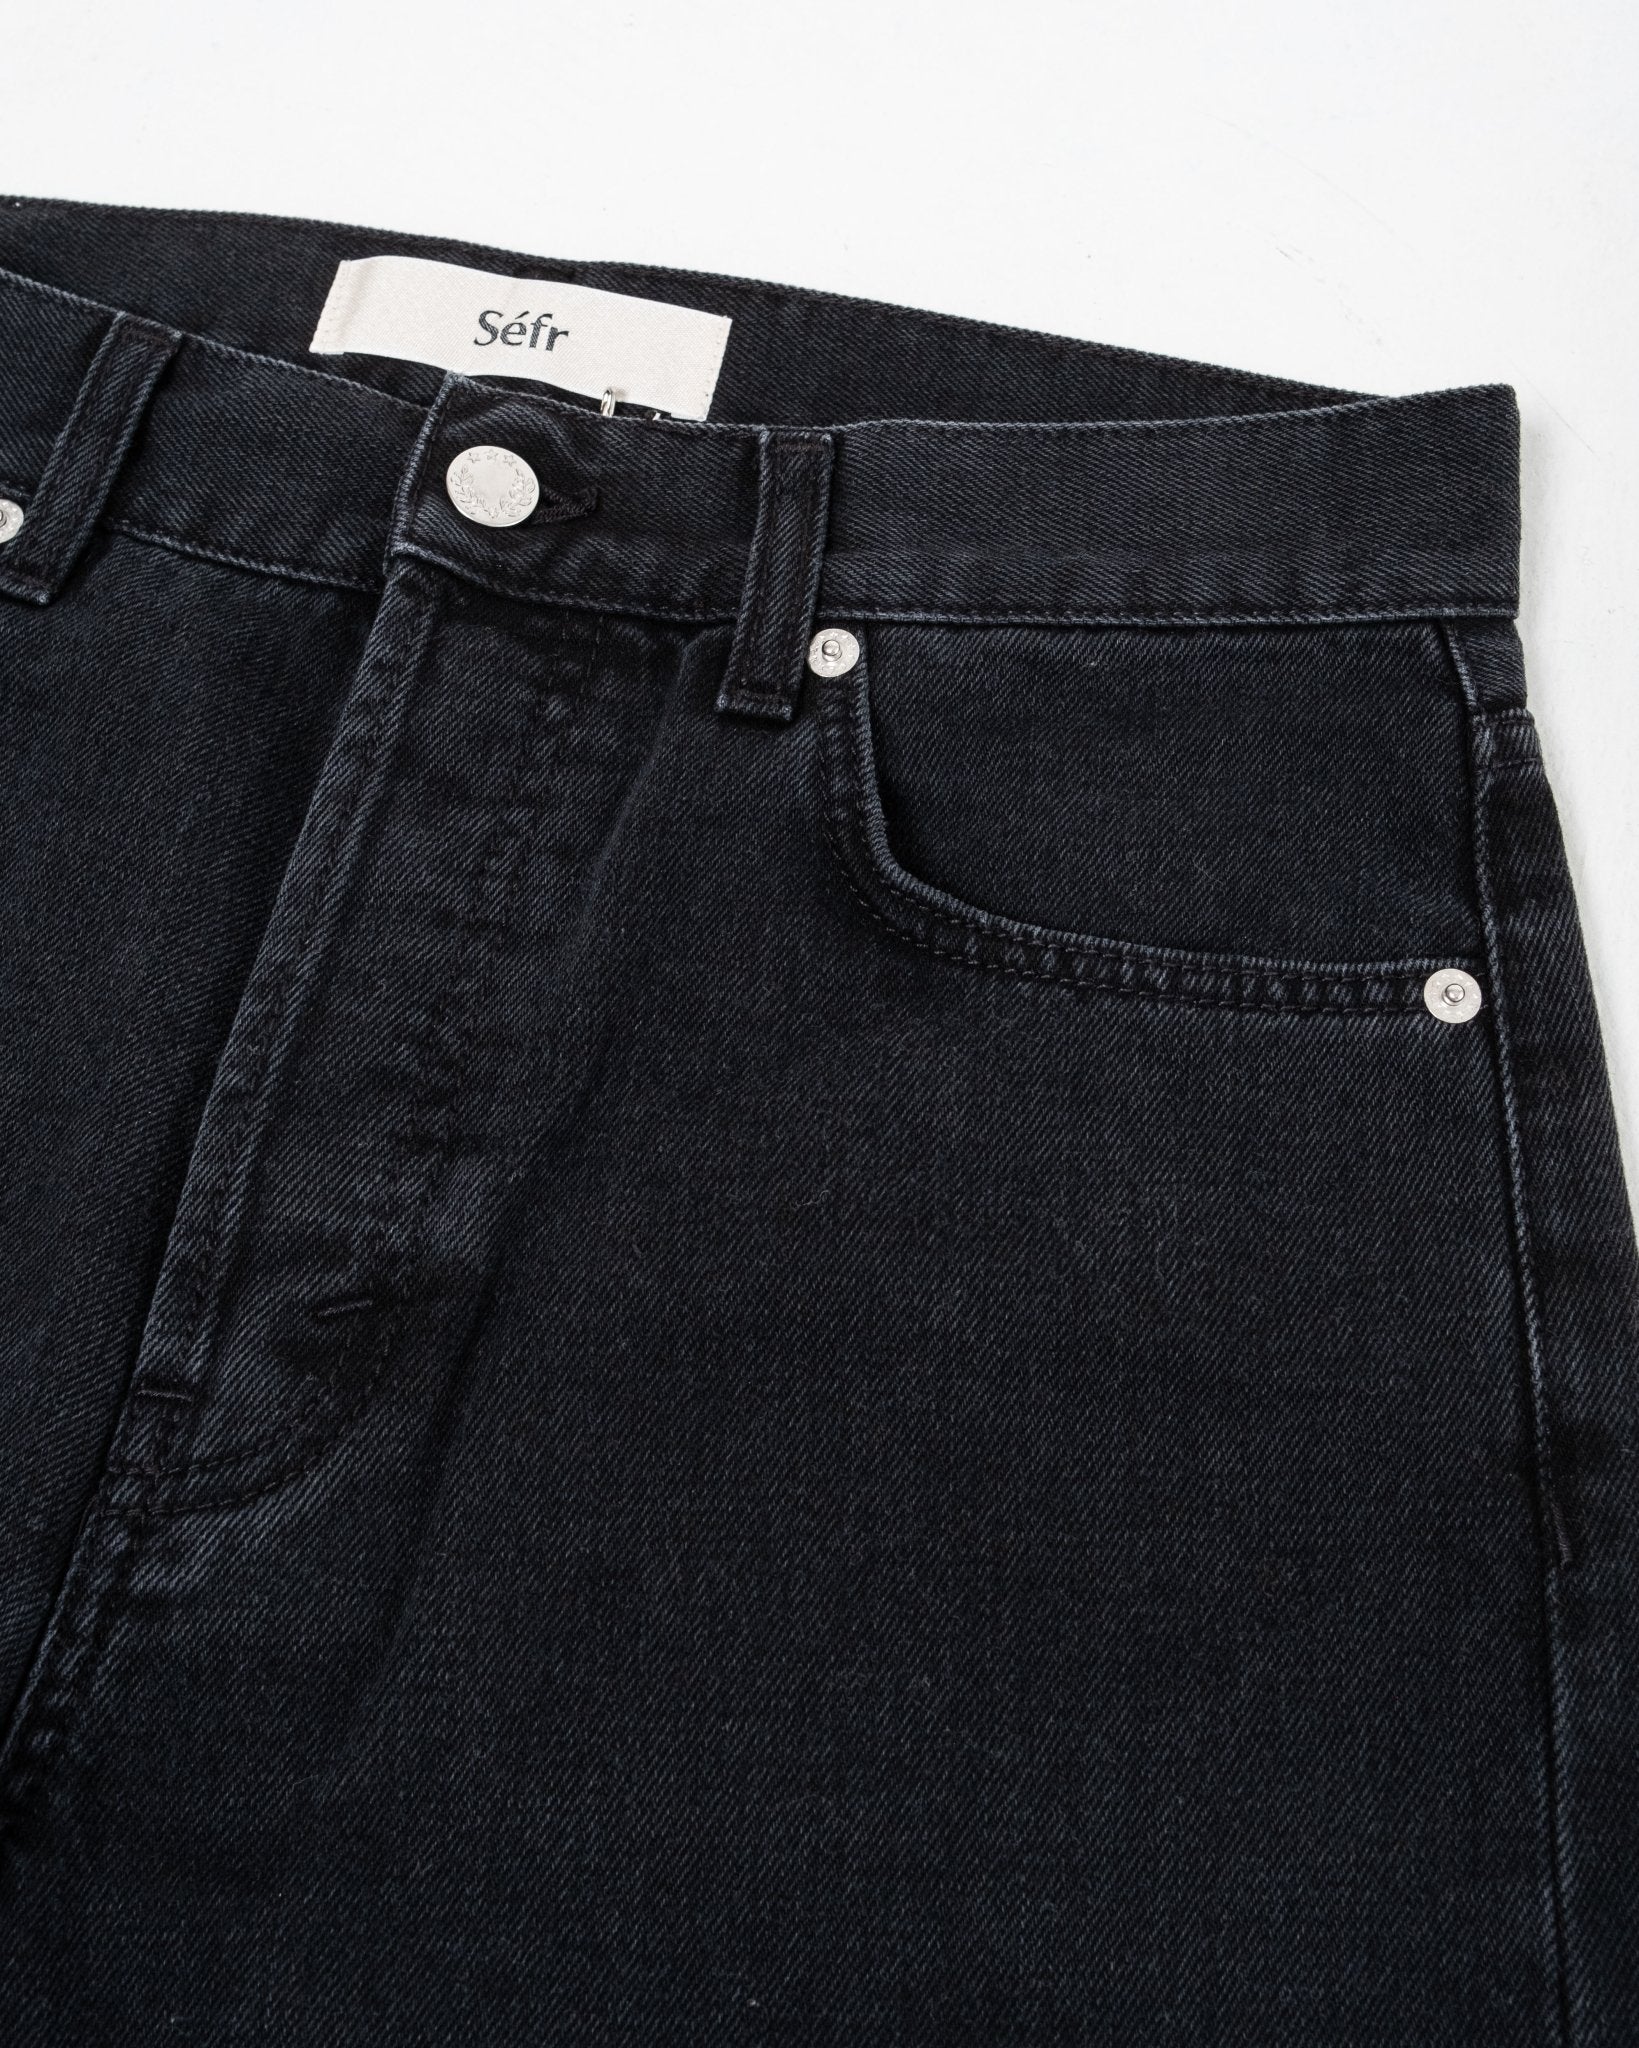 Straight Cut Jeans Rinsed Black - Meadow of Malmö